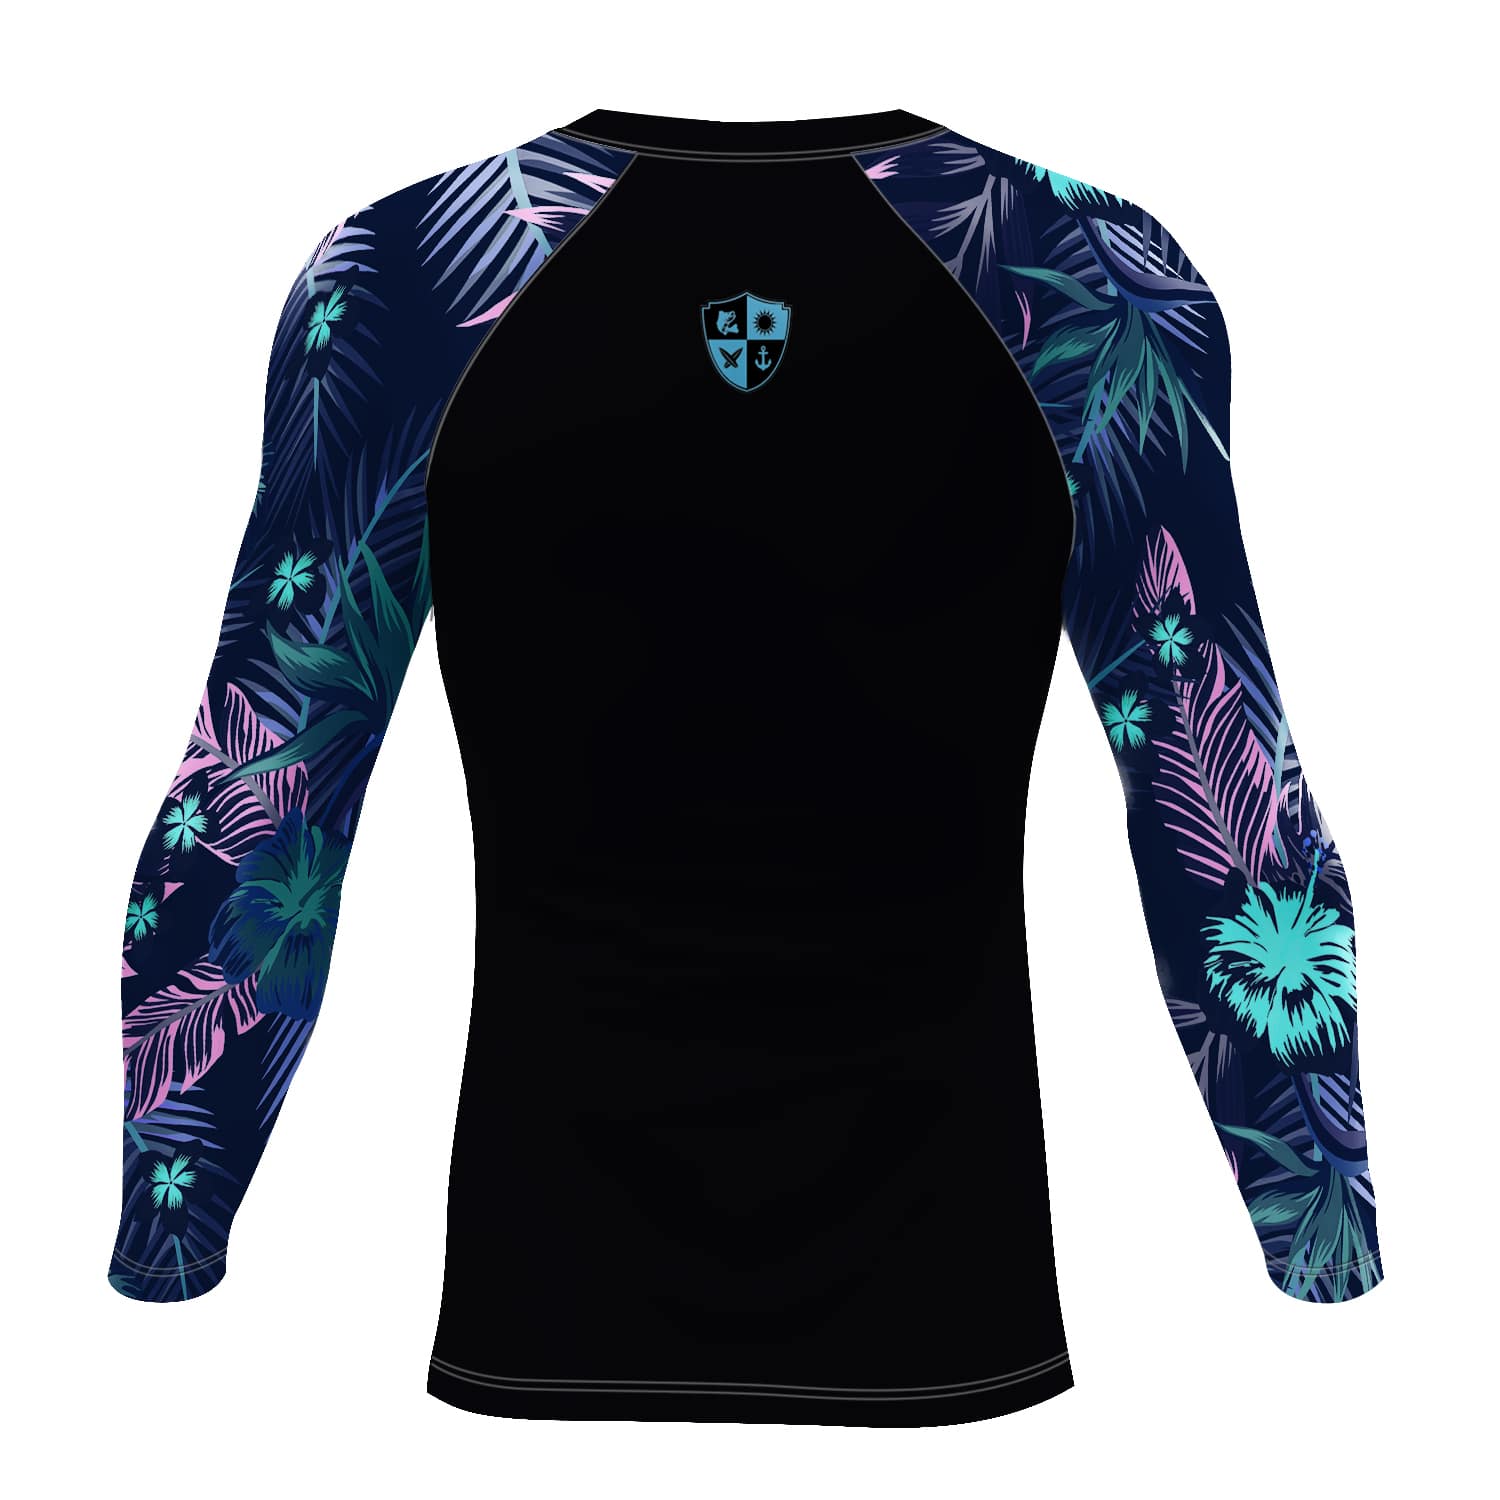 Men's Find Your Coast Floral Sleeve Sea Skinz Performance Rash Guard UPF 40+ FIND YOUR COAST  CO